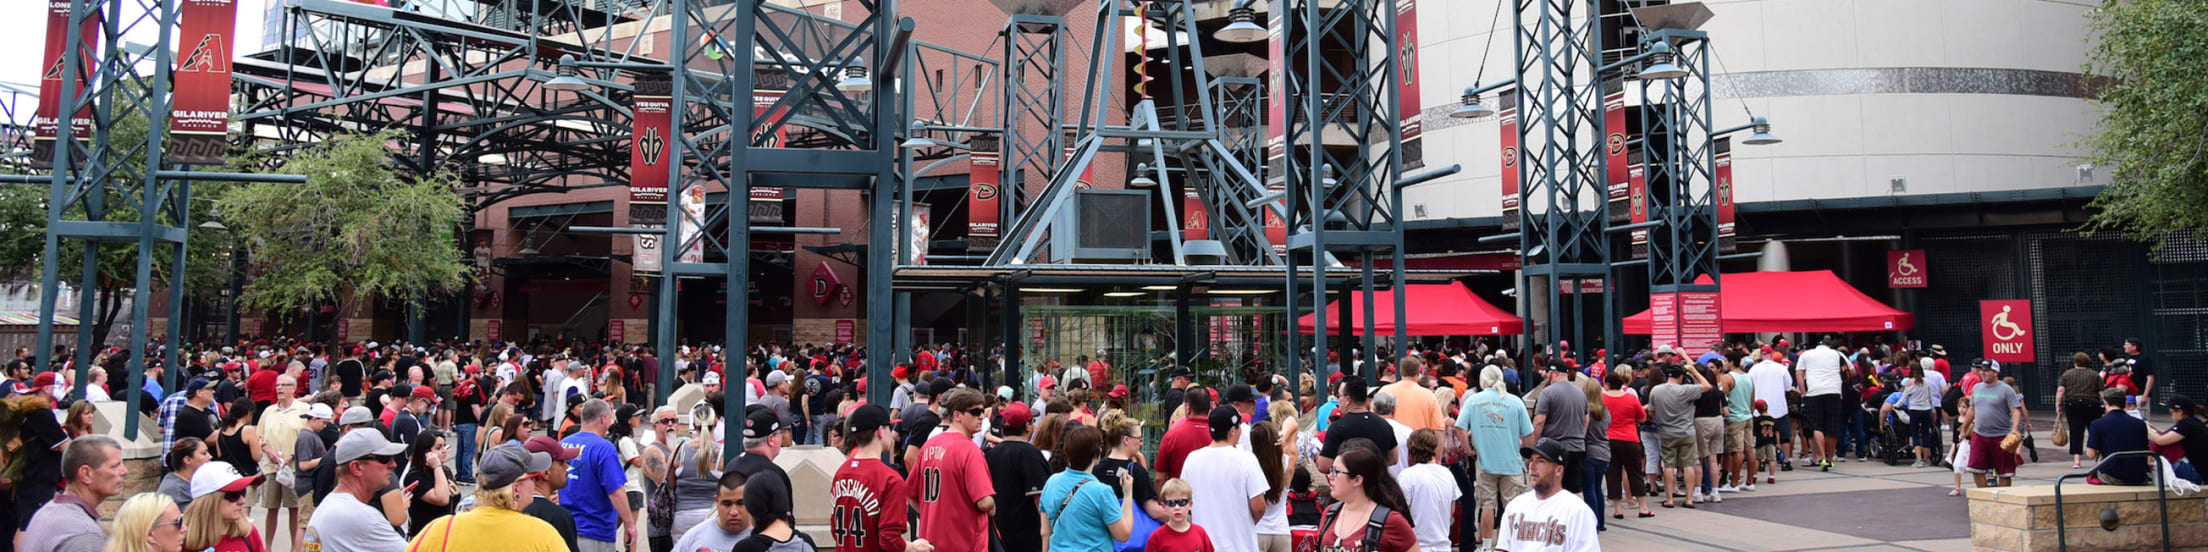 Chase Field Policies and Procedures